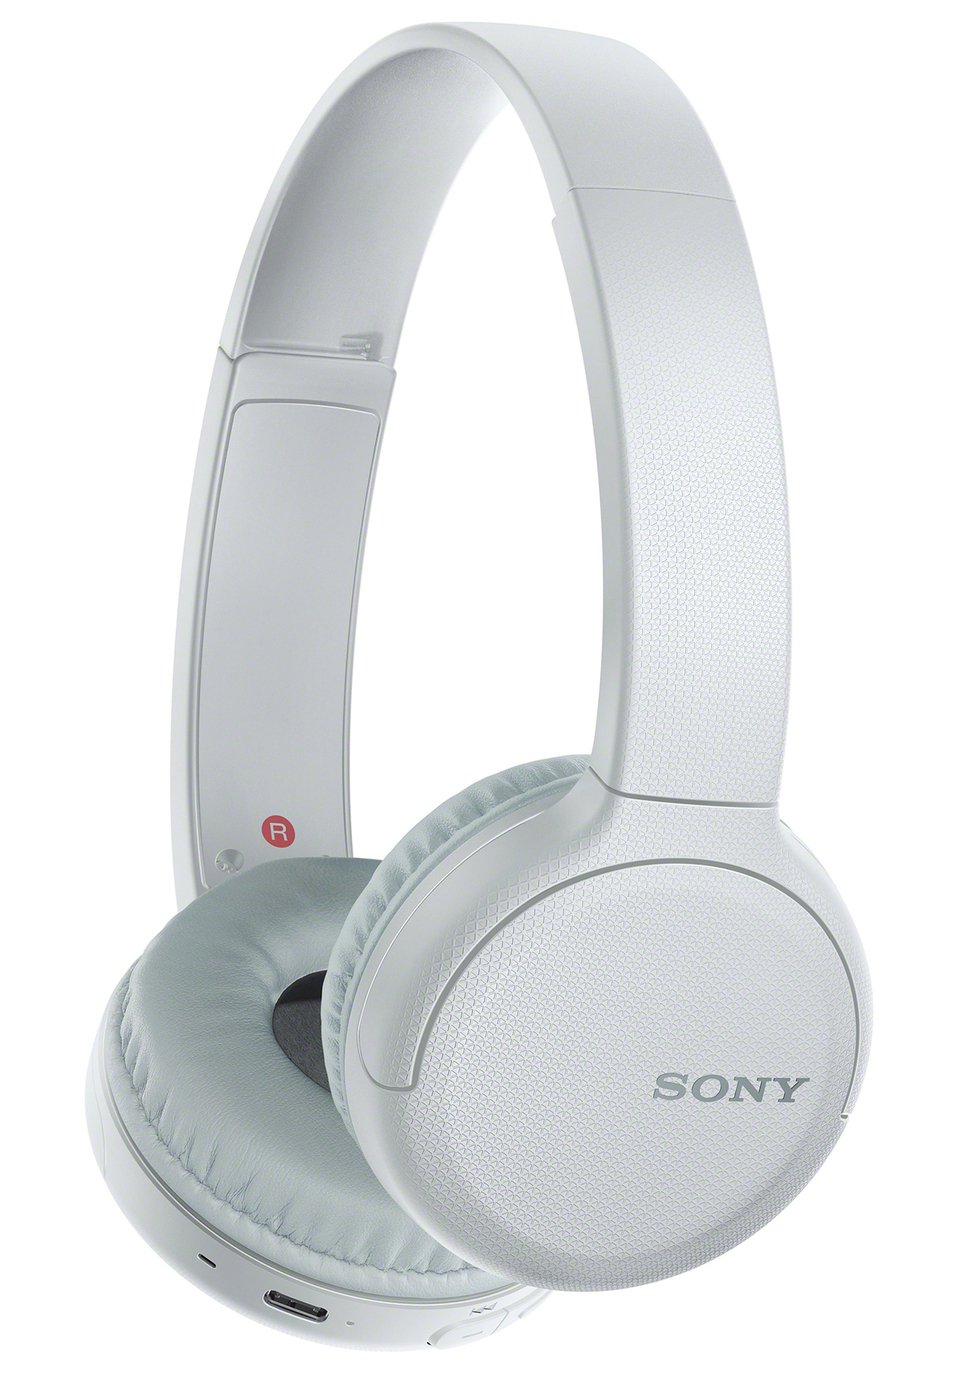 Sony WH-CH510 On-Ear Wireless Headphones Review